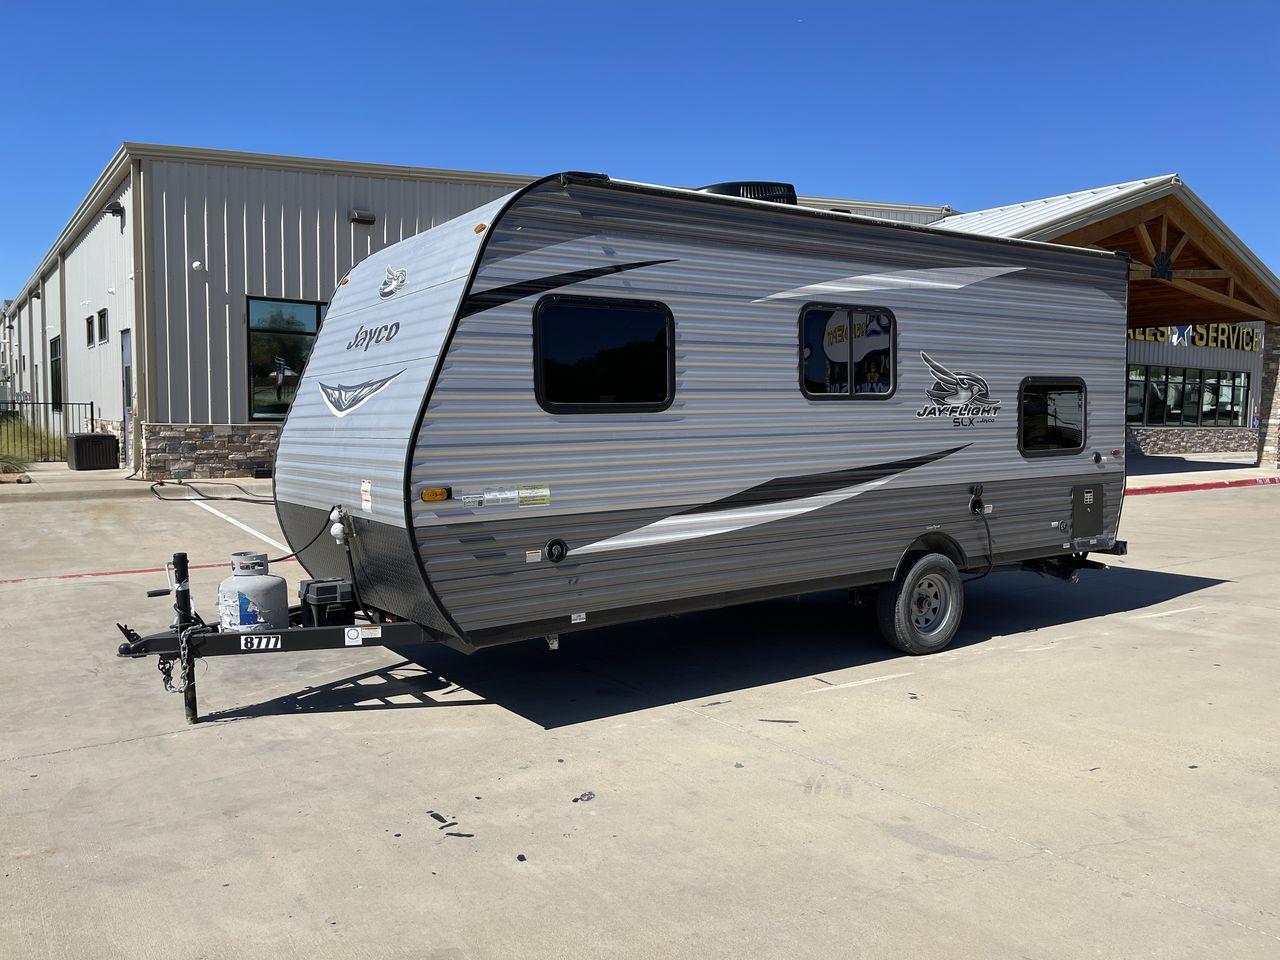 2021 JAYCO JAY FLIGHT SLX 174BH (1UJBJ0AJ1M1) , Length: 21.67 ft | Dry Weight: 3,075 lbs | GVWR: 3,950 lbs | Slides: 0 transmission, located at 4319 N Main St, Cleburne, TX, 76033, (817) 678-5133, 32.385960, -97.391212 - Take the 2021 Jayco Jay Flight SLX 174BH travel trailer out on your camping adventures. This lightweight and small RV is ideal for people looking for an affordable and cozy way to enjoy the great outdoors. The dimensions of this unit are 21.67 ft in length, 7.08 ft in width, and 9.17 ft in height. I - Photo #23